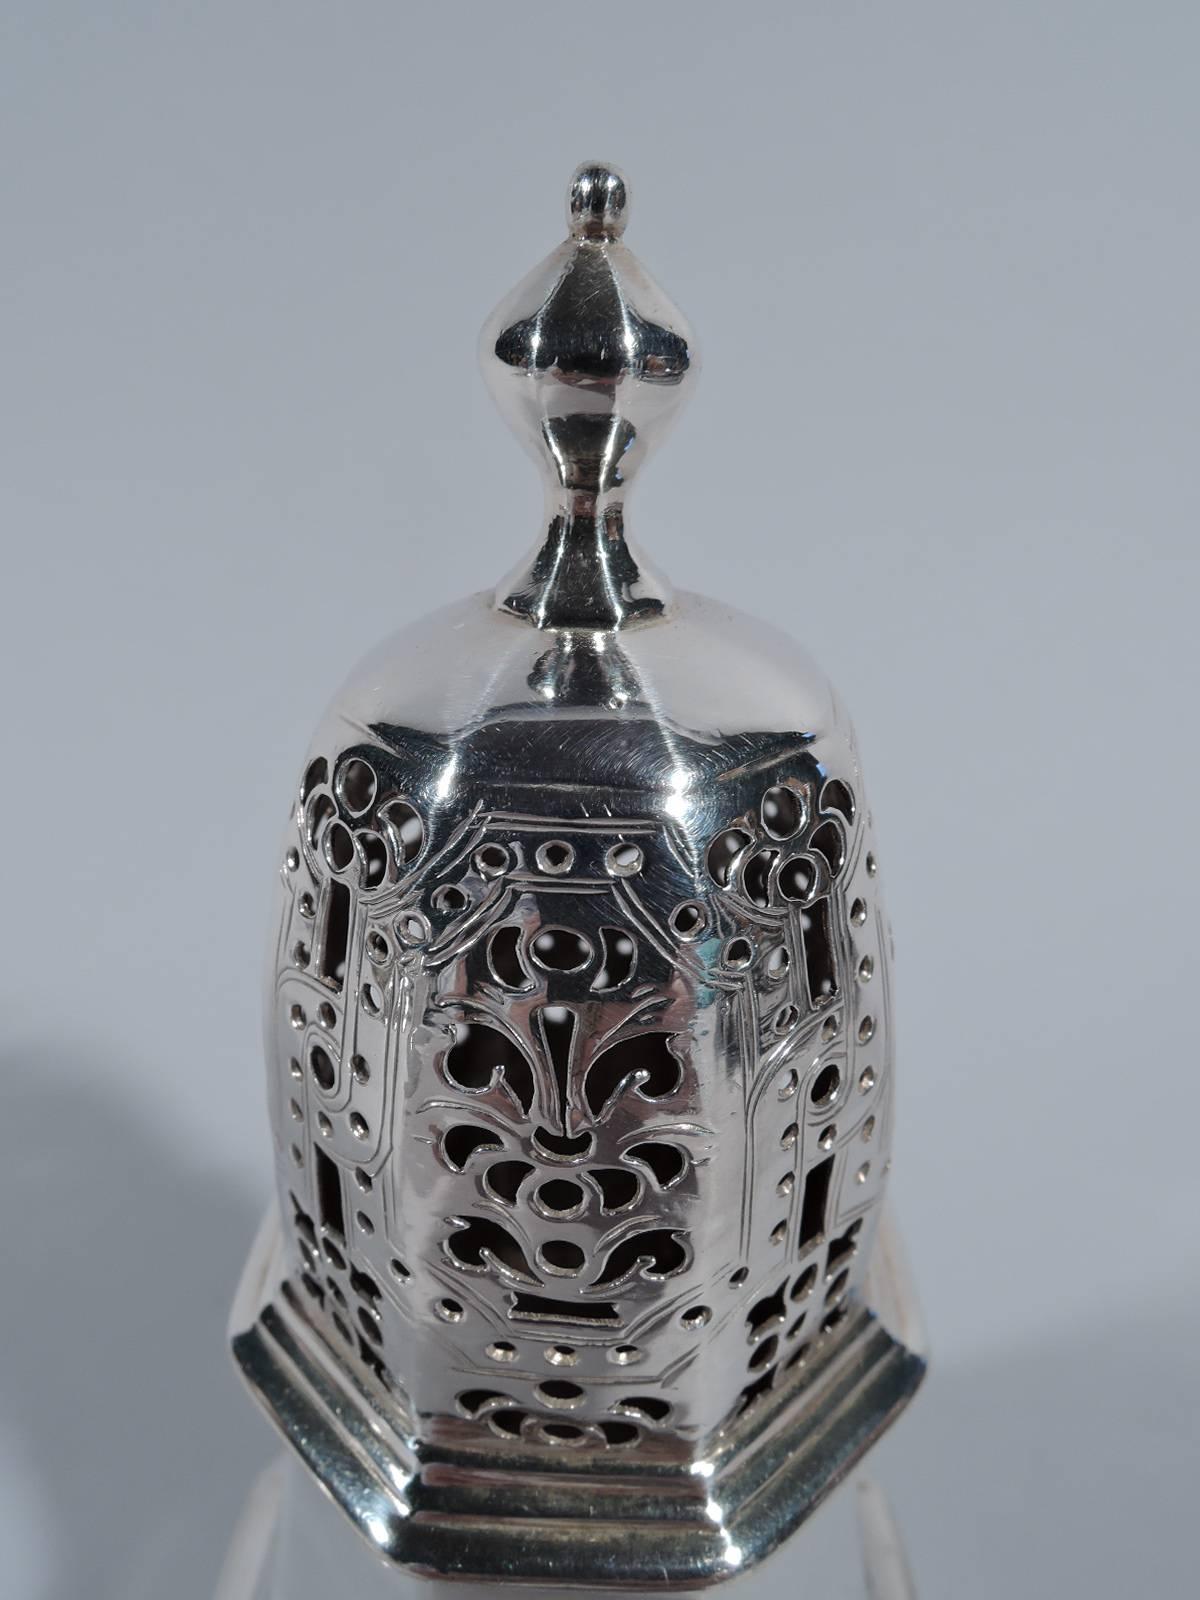 George I sterling silver sugar Shaker. Made by Charles Adam in London in 1719. Faceted baluster on raised faceted foot. Cover has ornamental piercing and finial. Hallmarked. Weight: 4.4 troy ounces.